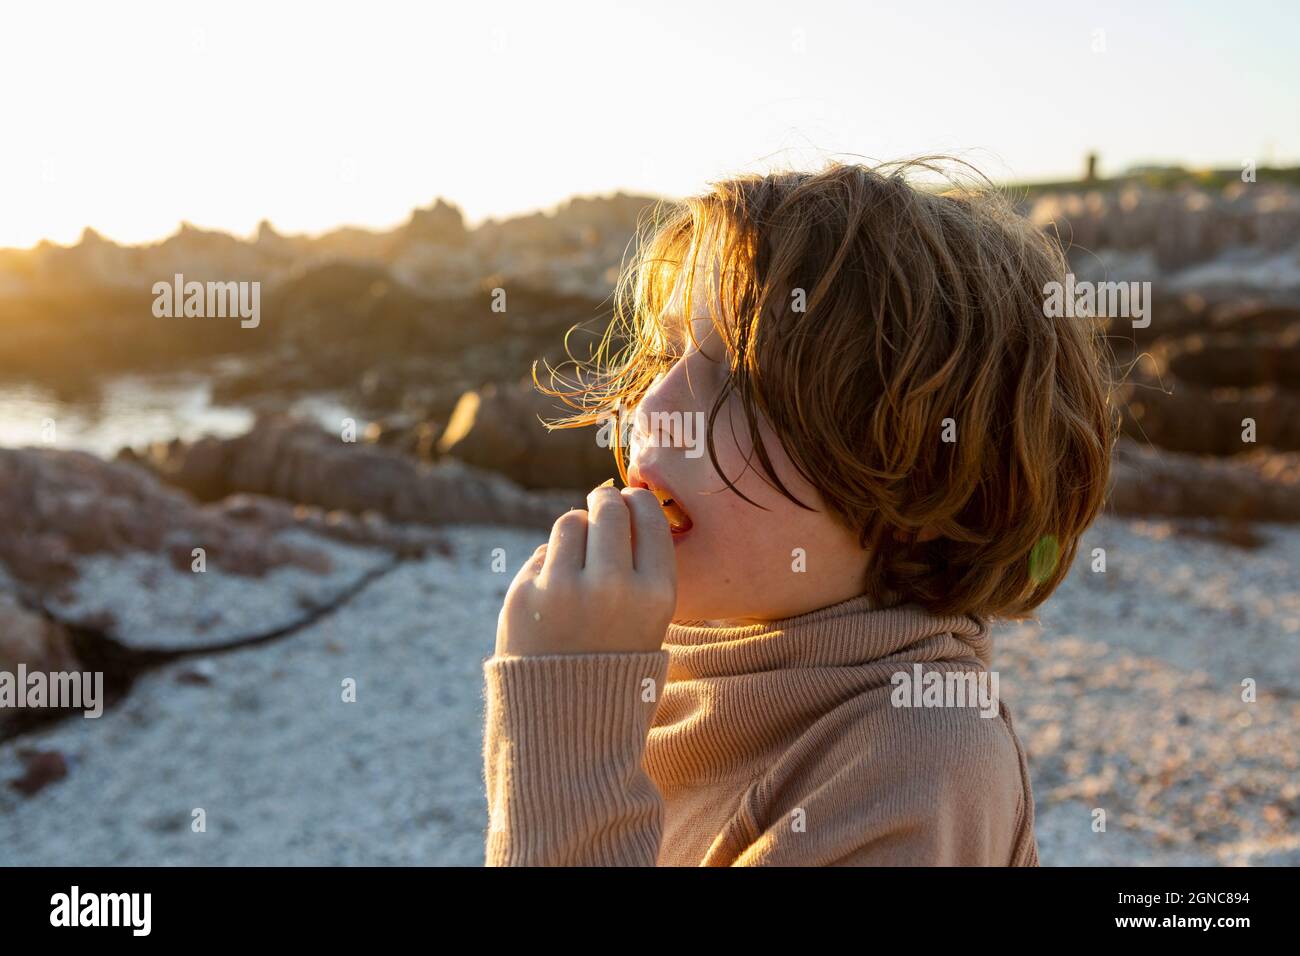 A boy on the beach at sunset, having a snack. Stock Photo